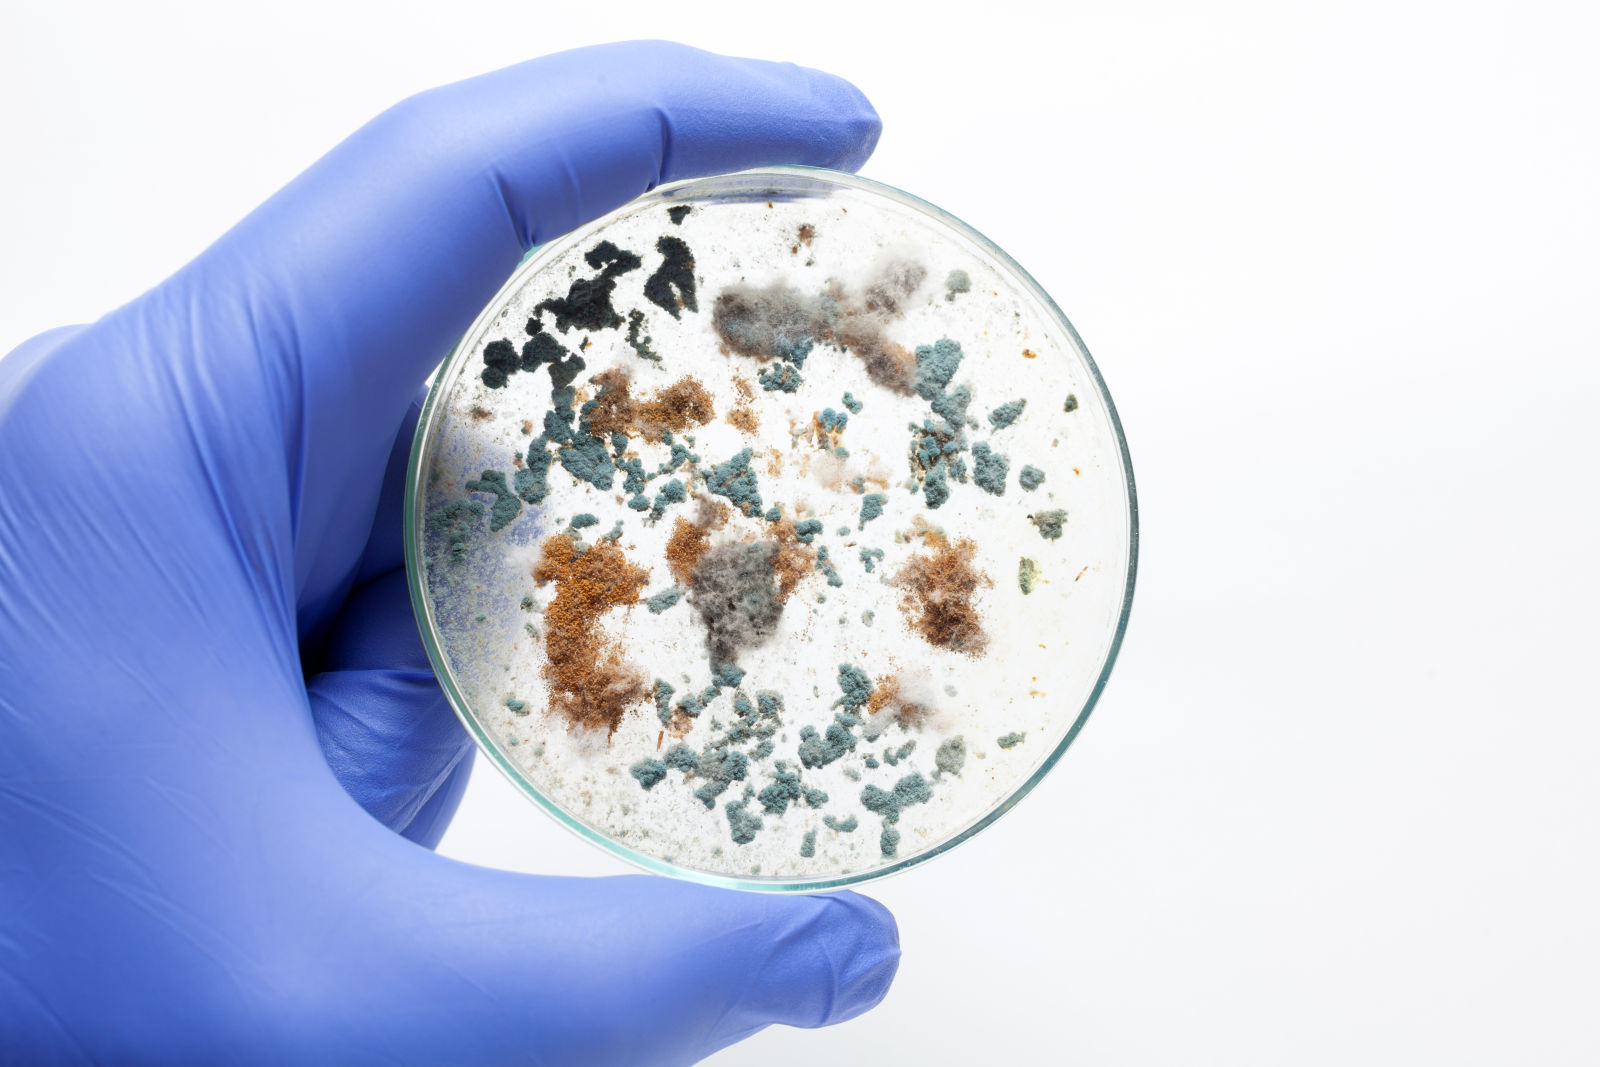 What to expect from a Mold Test